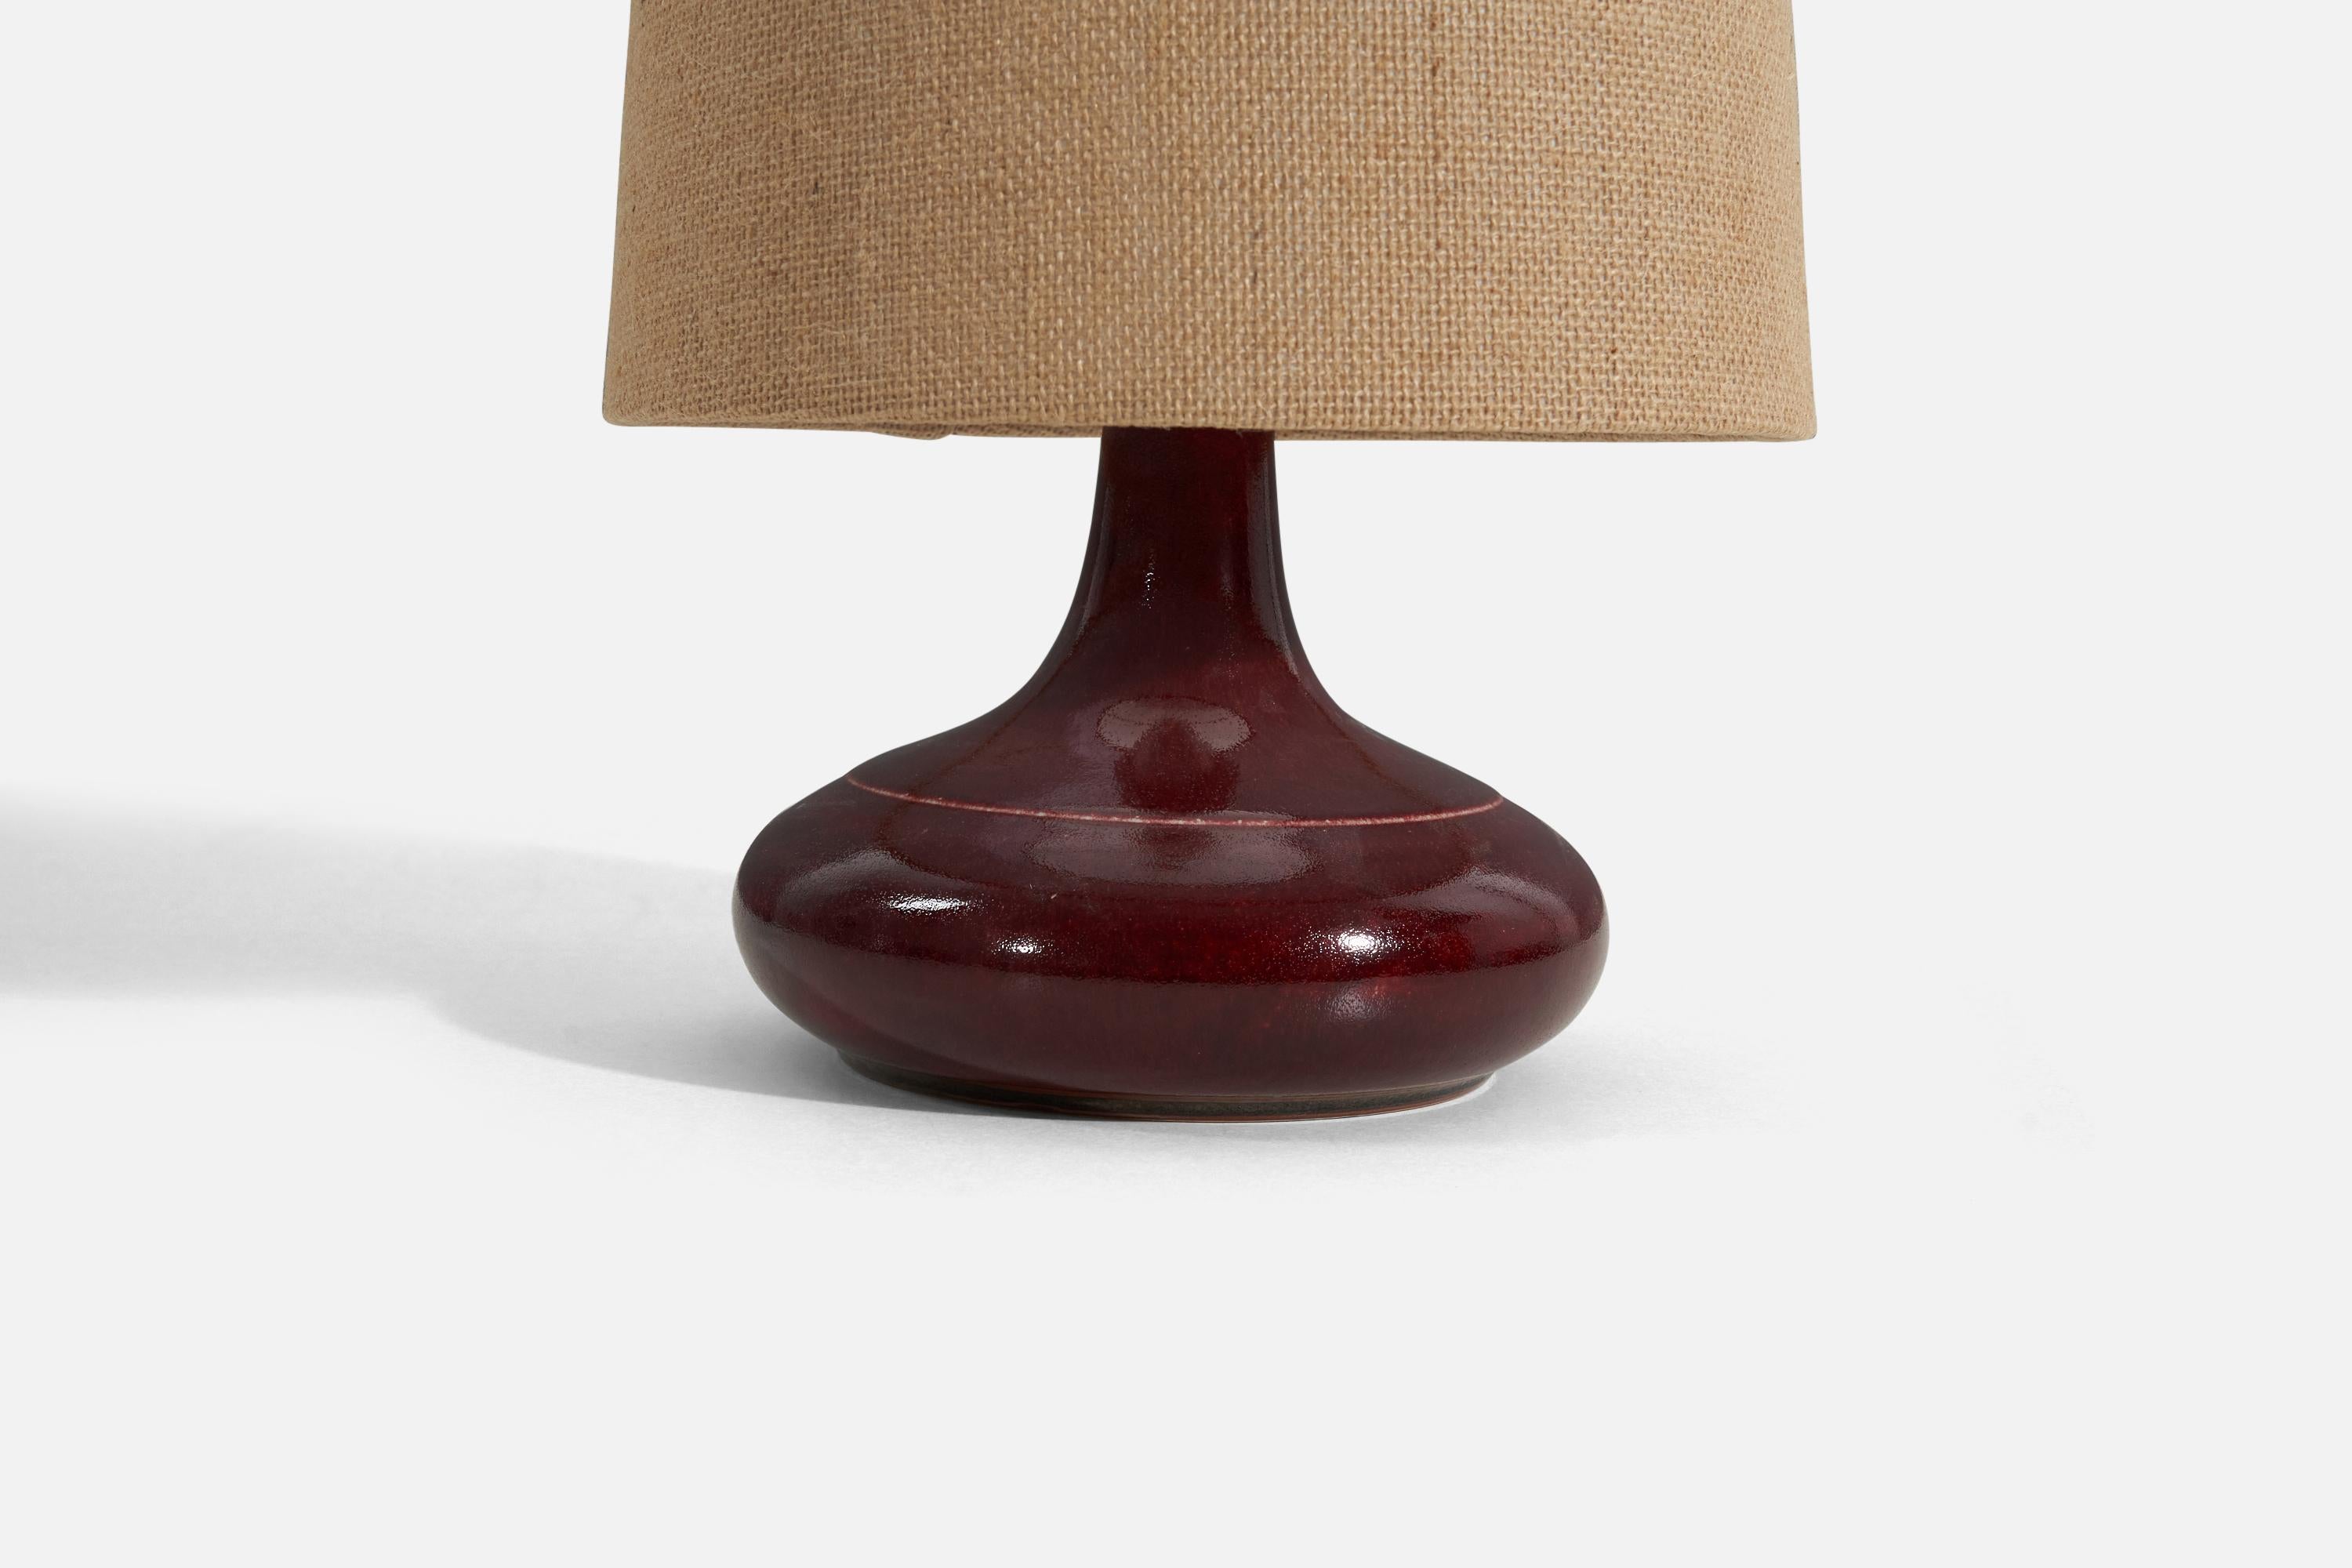 Desiree Stentøj, Table Lamp, Red-Glazed Stoneware, Denmark, 1960s In Good Condition For Sale In High Point, NC